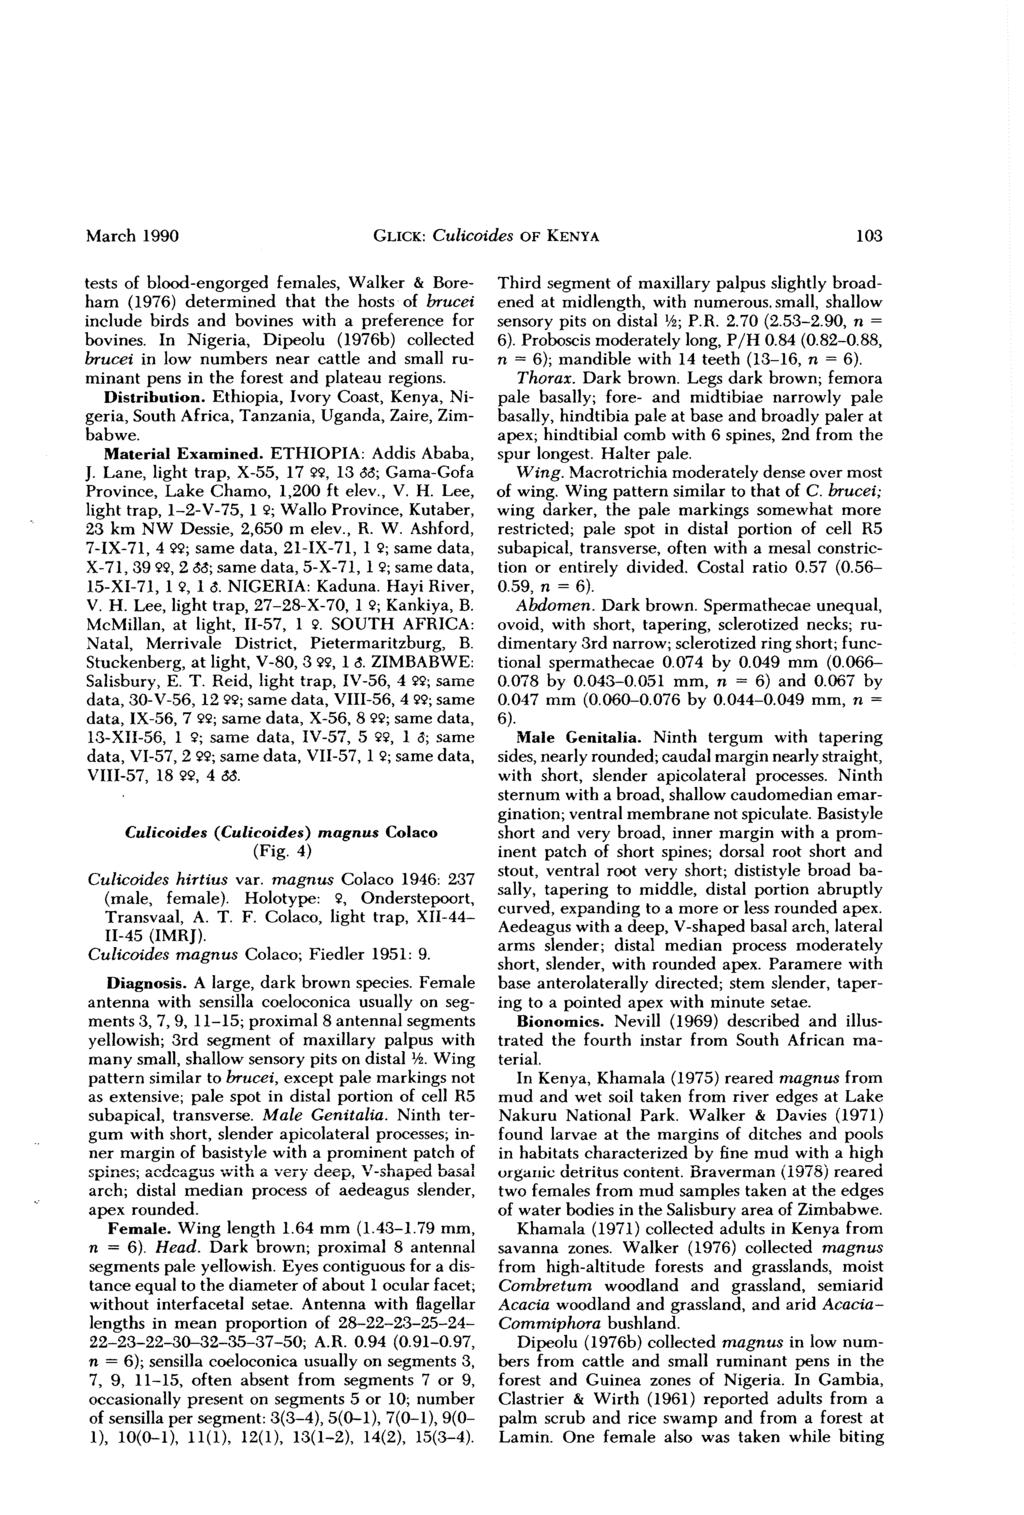 March 1990 GLICK: Culicoides OF KENYA 103 tests of blood-engorged females, Walker & Boreham (1976) determined that the hosts of brucei include birds and bovines with a preference for bovines.